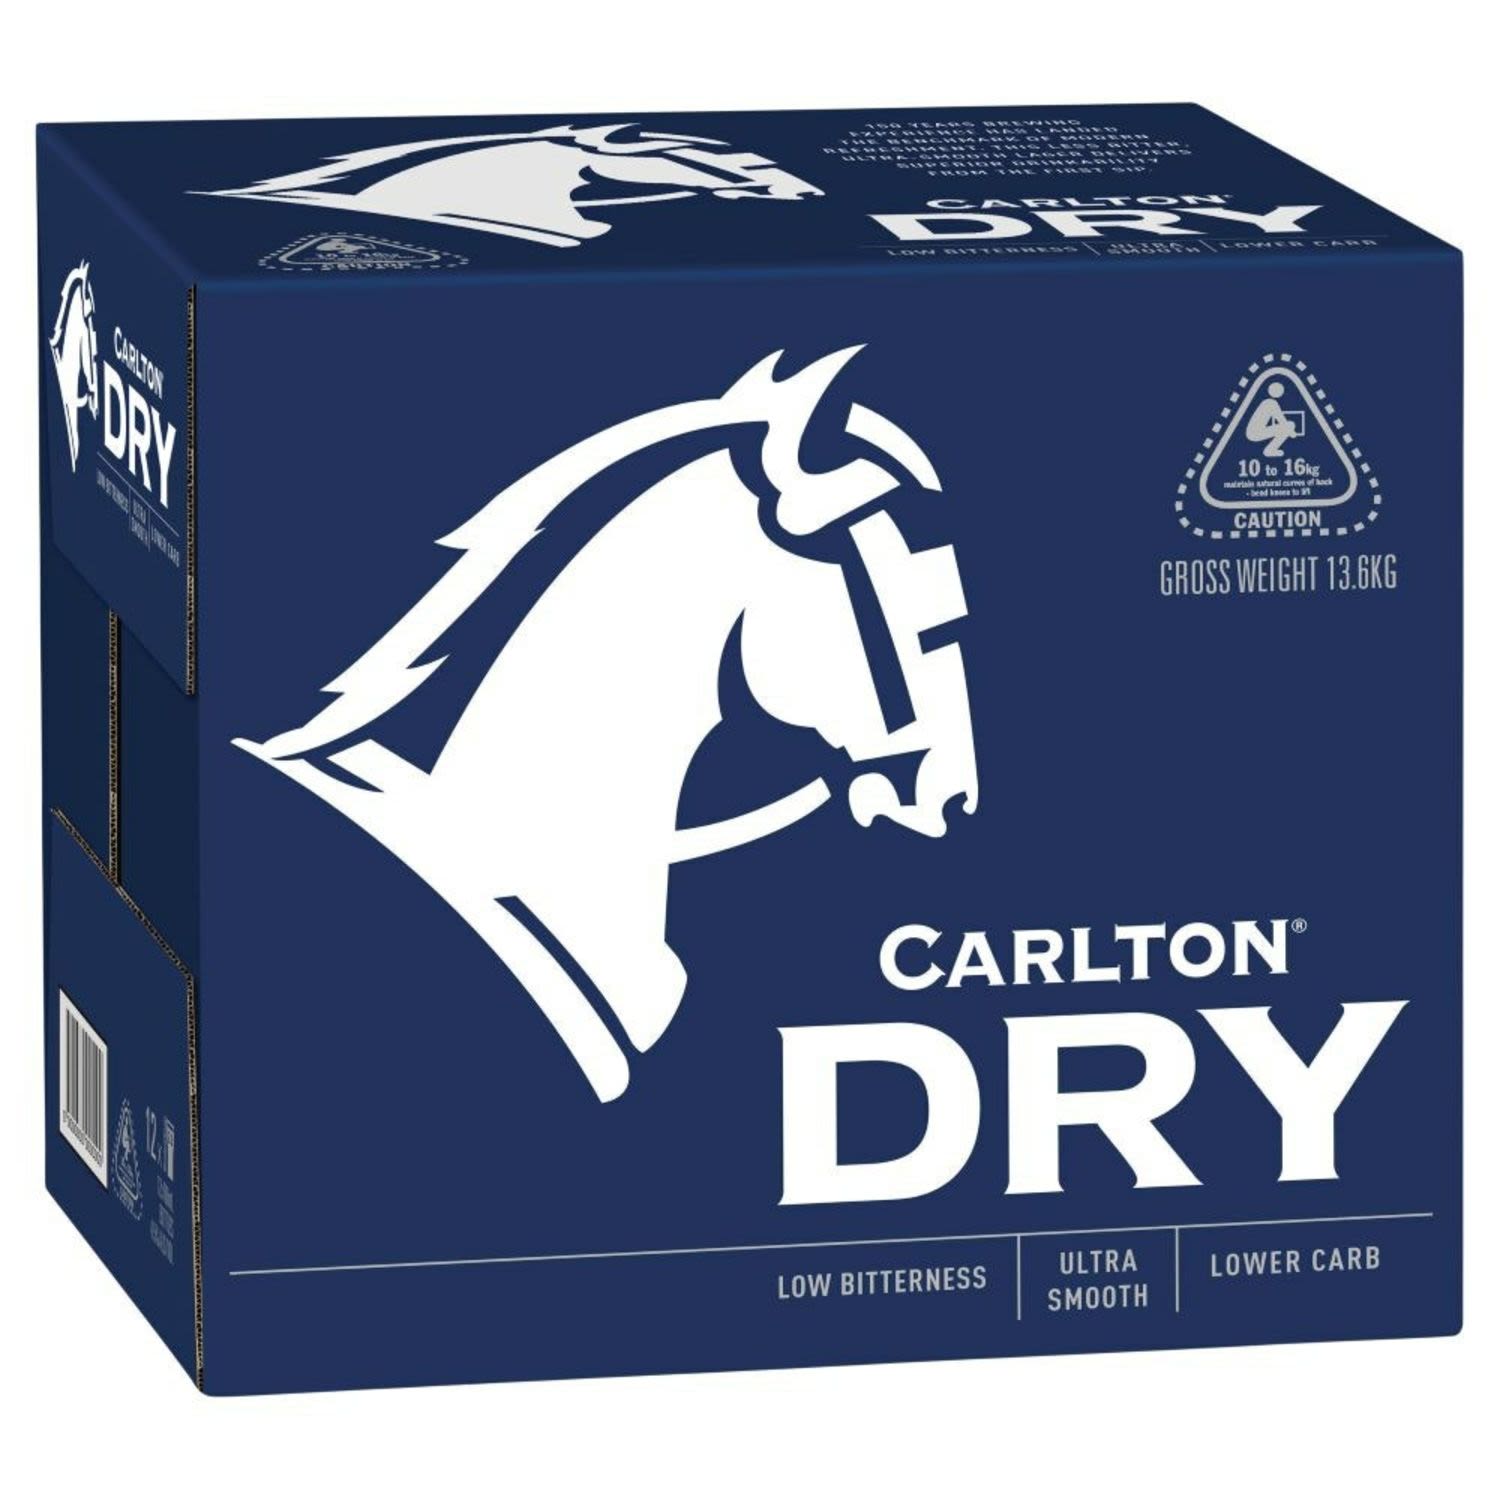 Carlton Dry's extended brewing process removes excess sugars creating a smooth, crisp finish with lower carbohydrates than a full strength beer. A clean, crisp and incredibly refreshing lager that is perfect drinking in the summer sunshine or equally good at home.<br /> <br />Alcohol Volume: 4.50%<br /><br />Pack Format: 12 Pack<br /><br />Standard Drinks: 2.5<br /><br />Pack Type: Bottle<br /><br />Country of Origin: Australia<br />